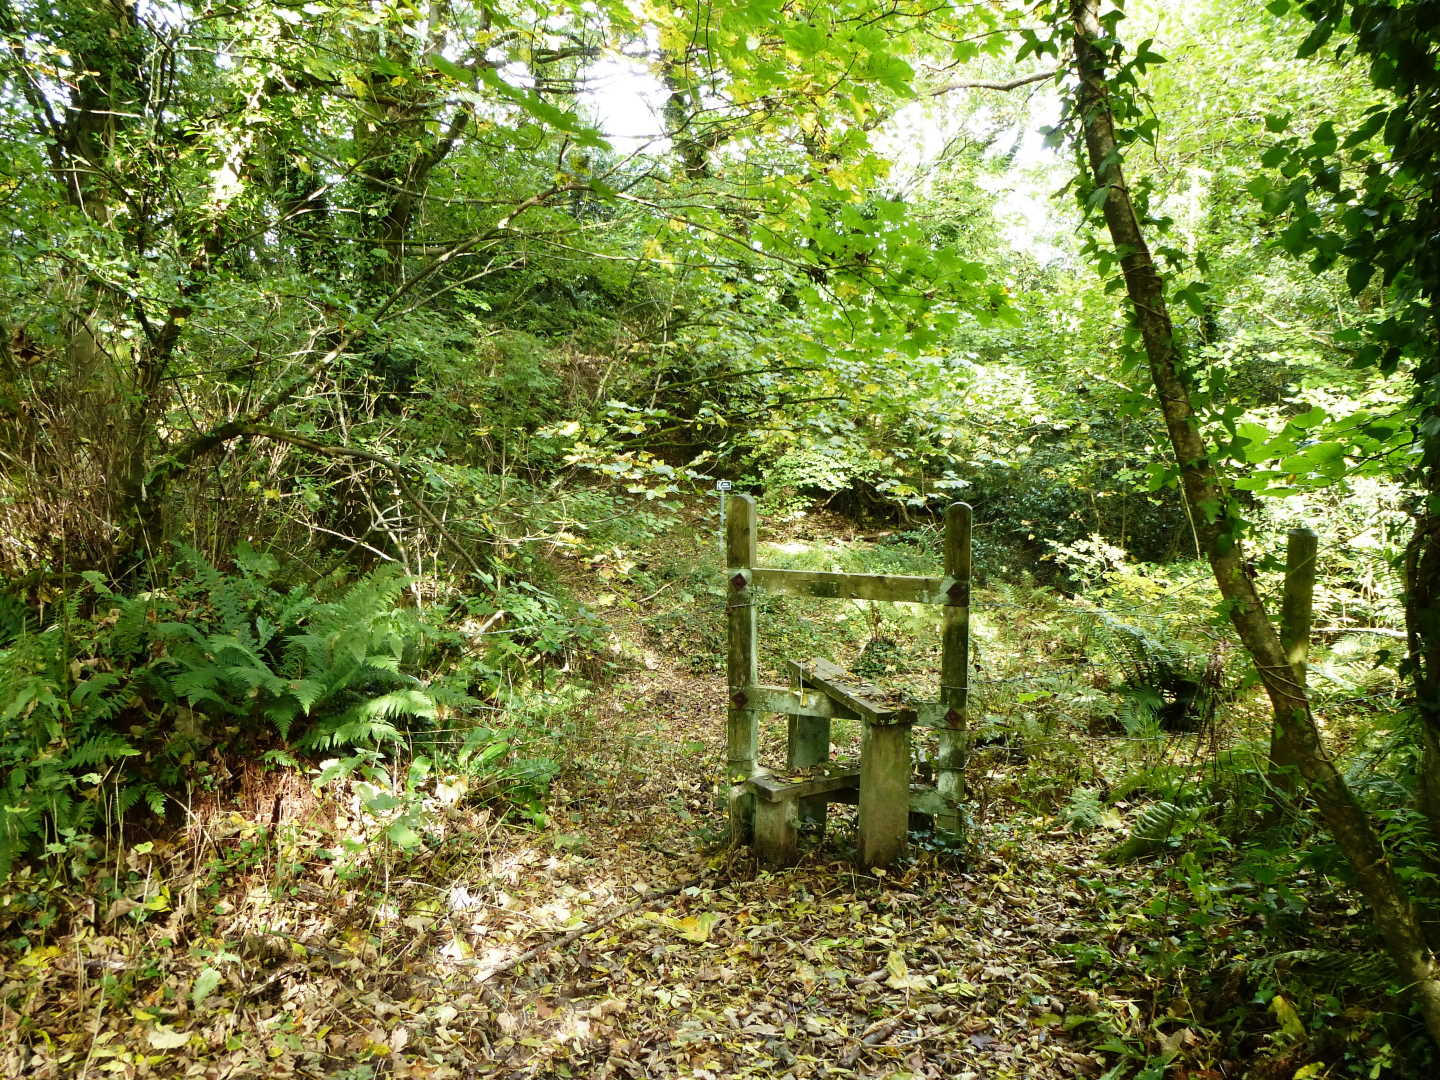 A wooden stile in a wooded area